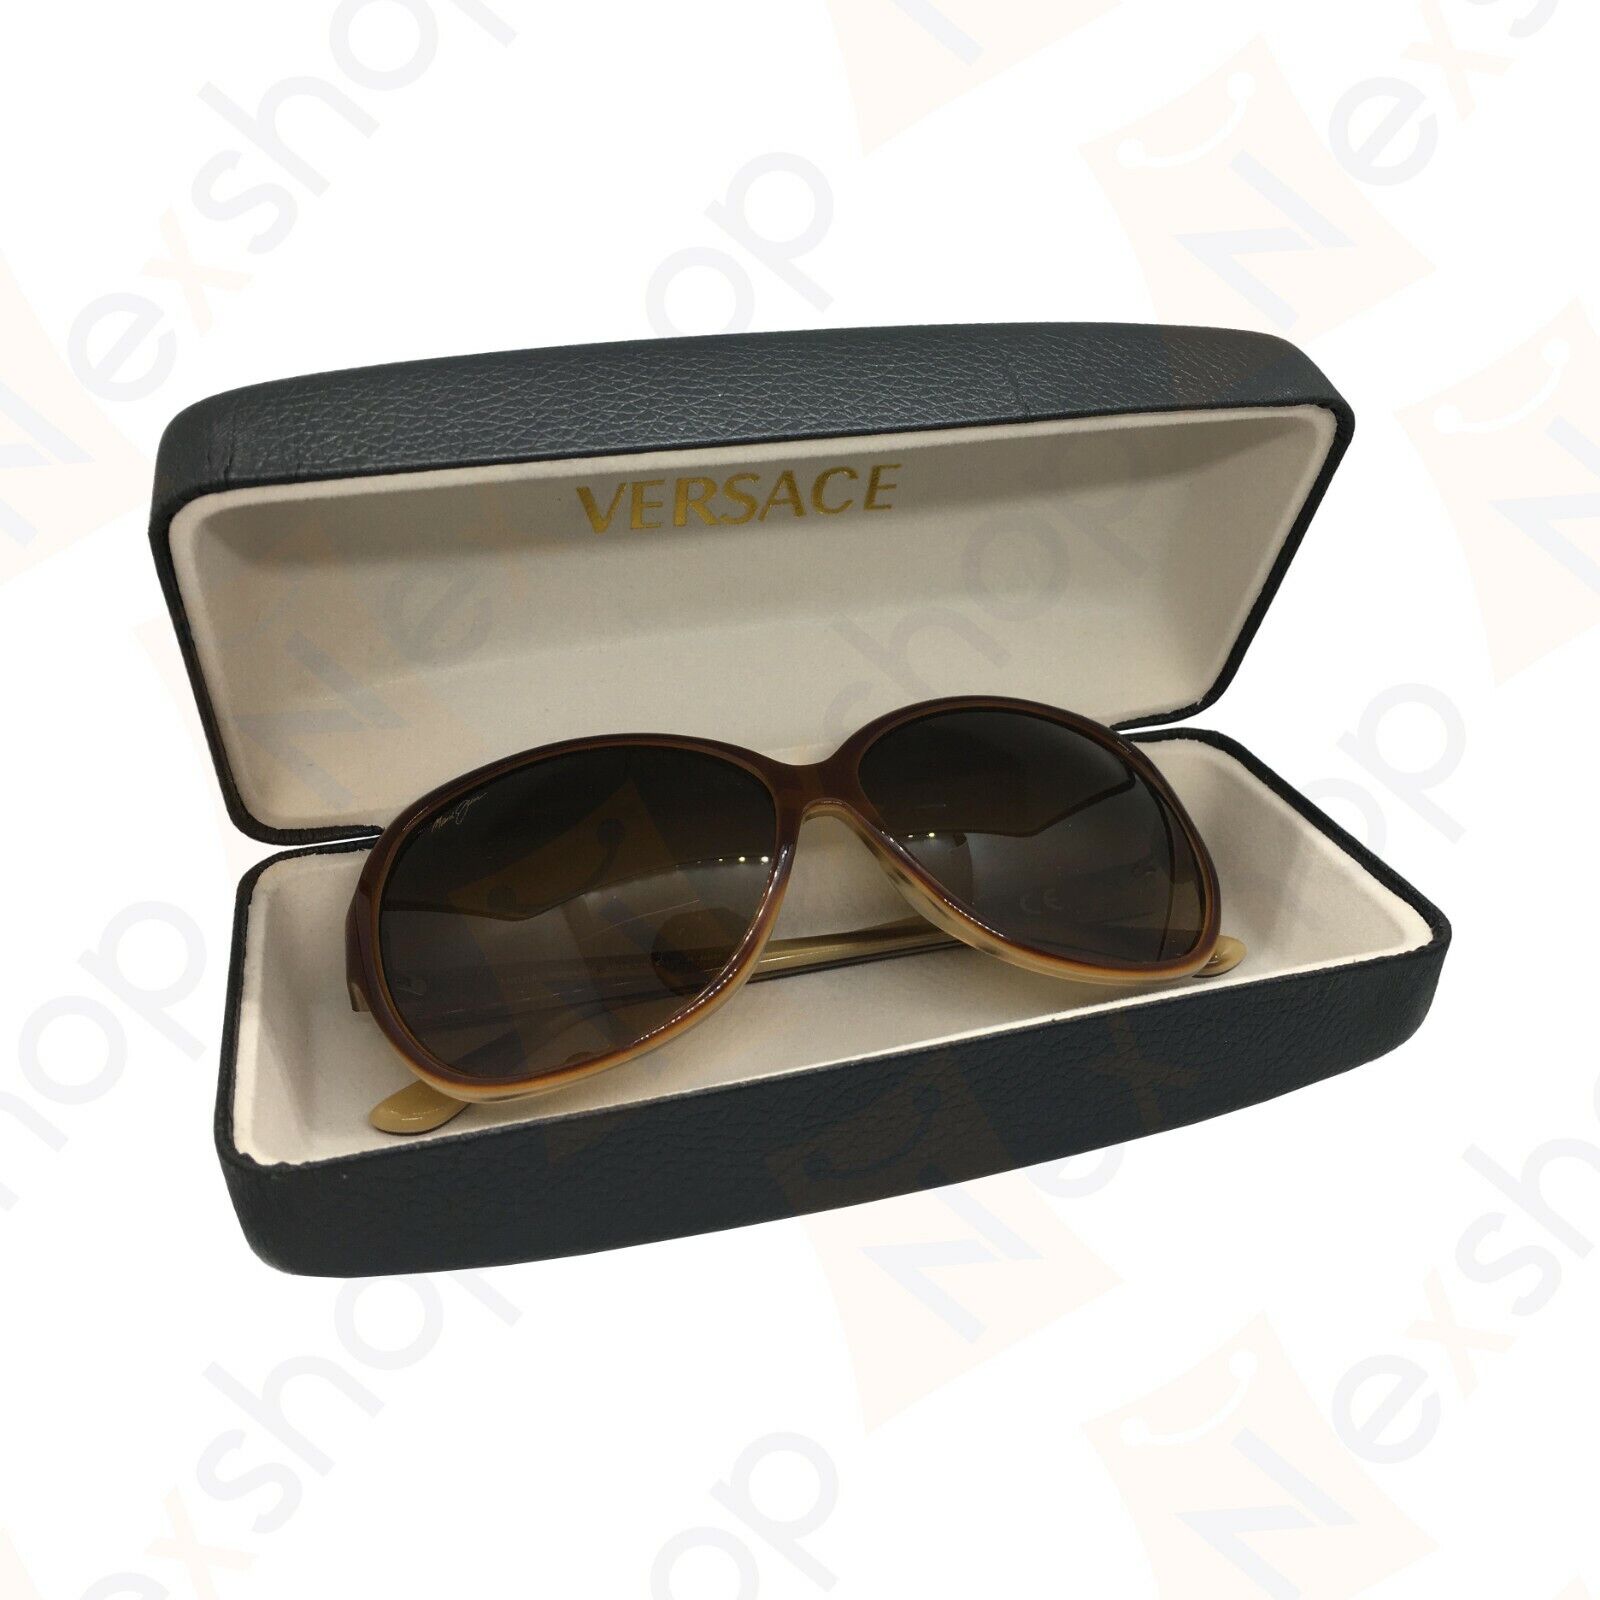 Versace Sunglasses Eyeglasses Leather Hard Case with Cleaning Cloth & Gift Box